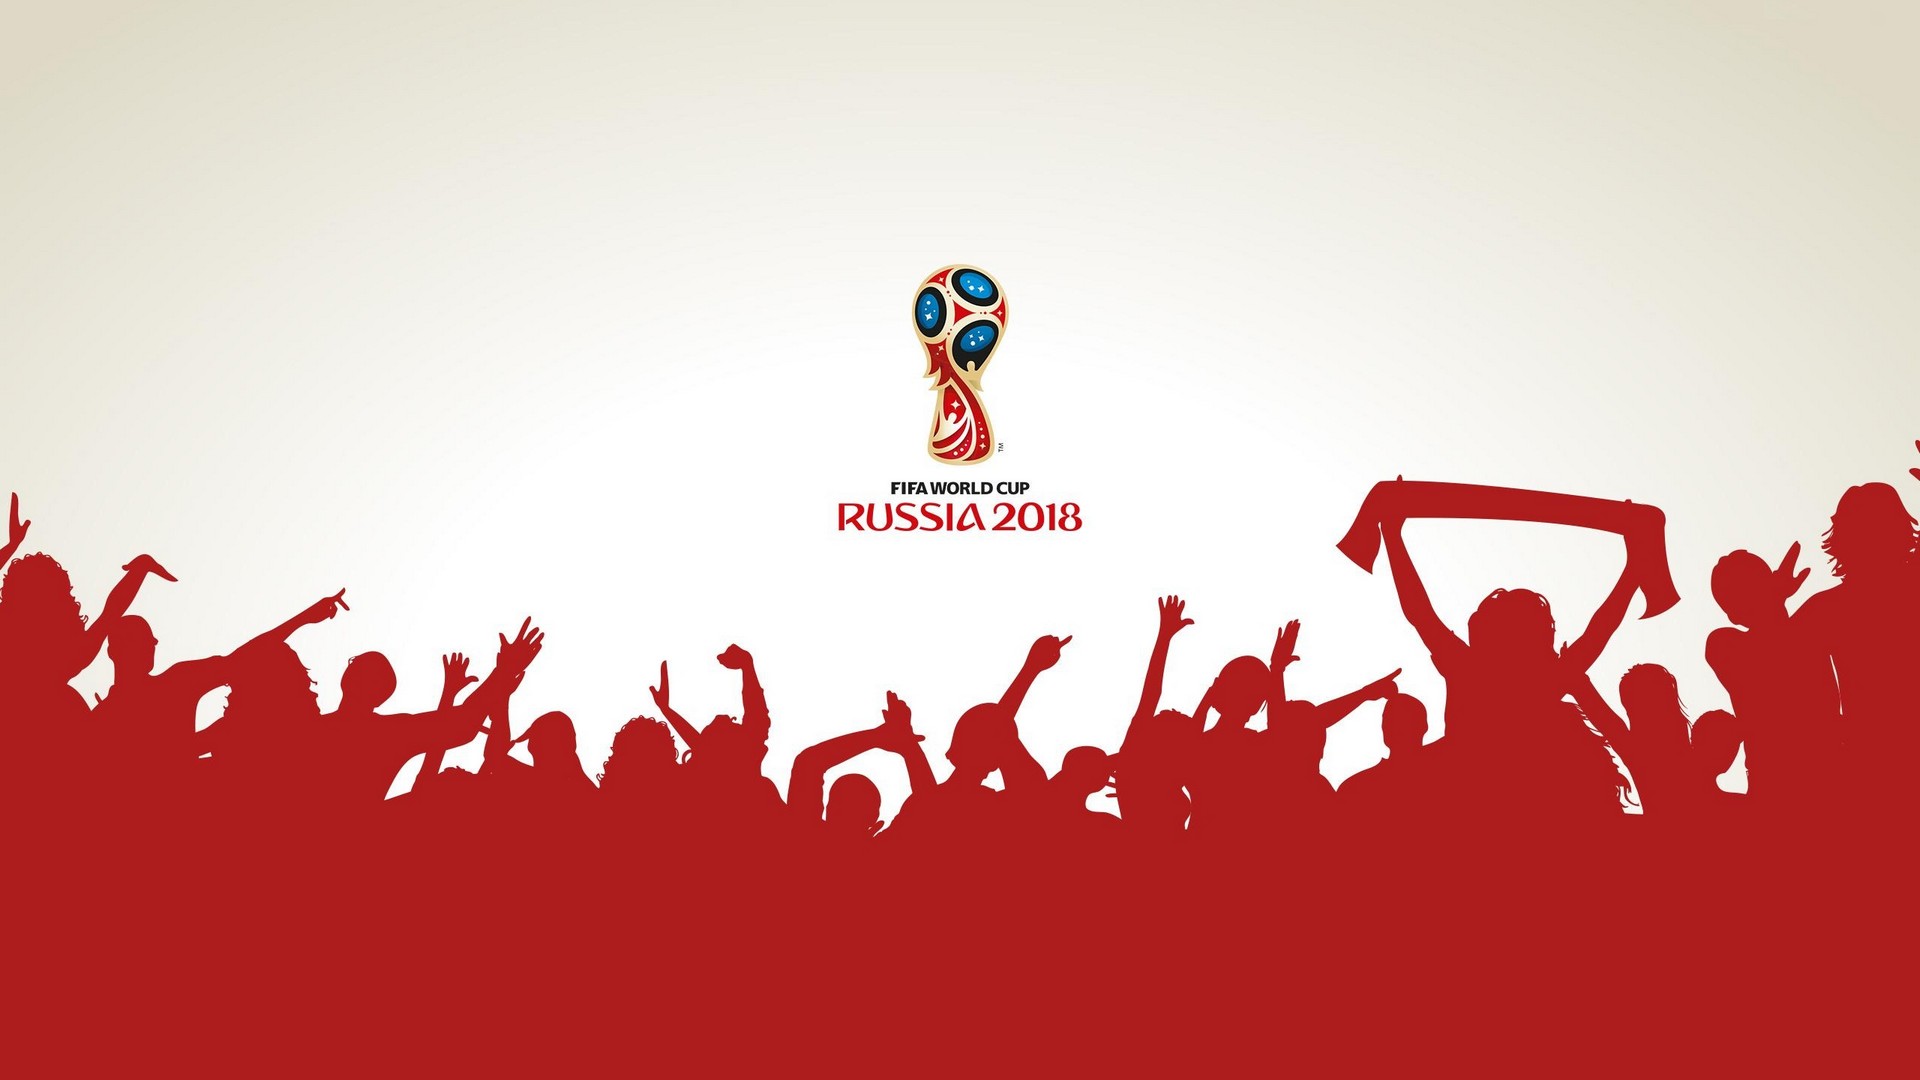 FIFA World Cup Russia 2018 Wallpapers